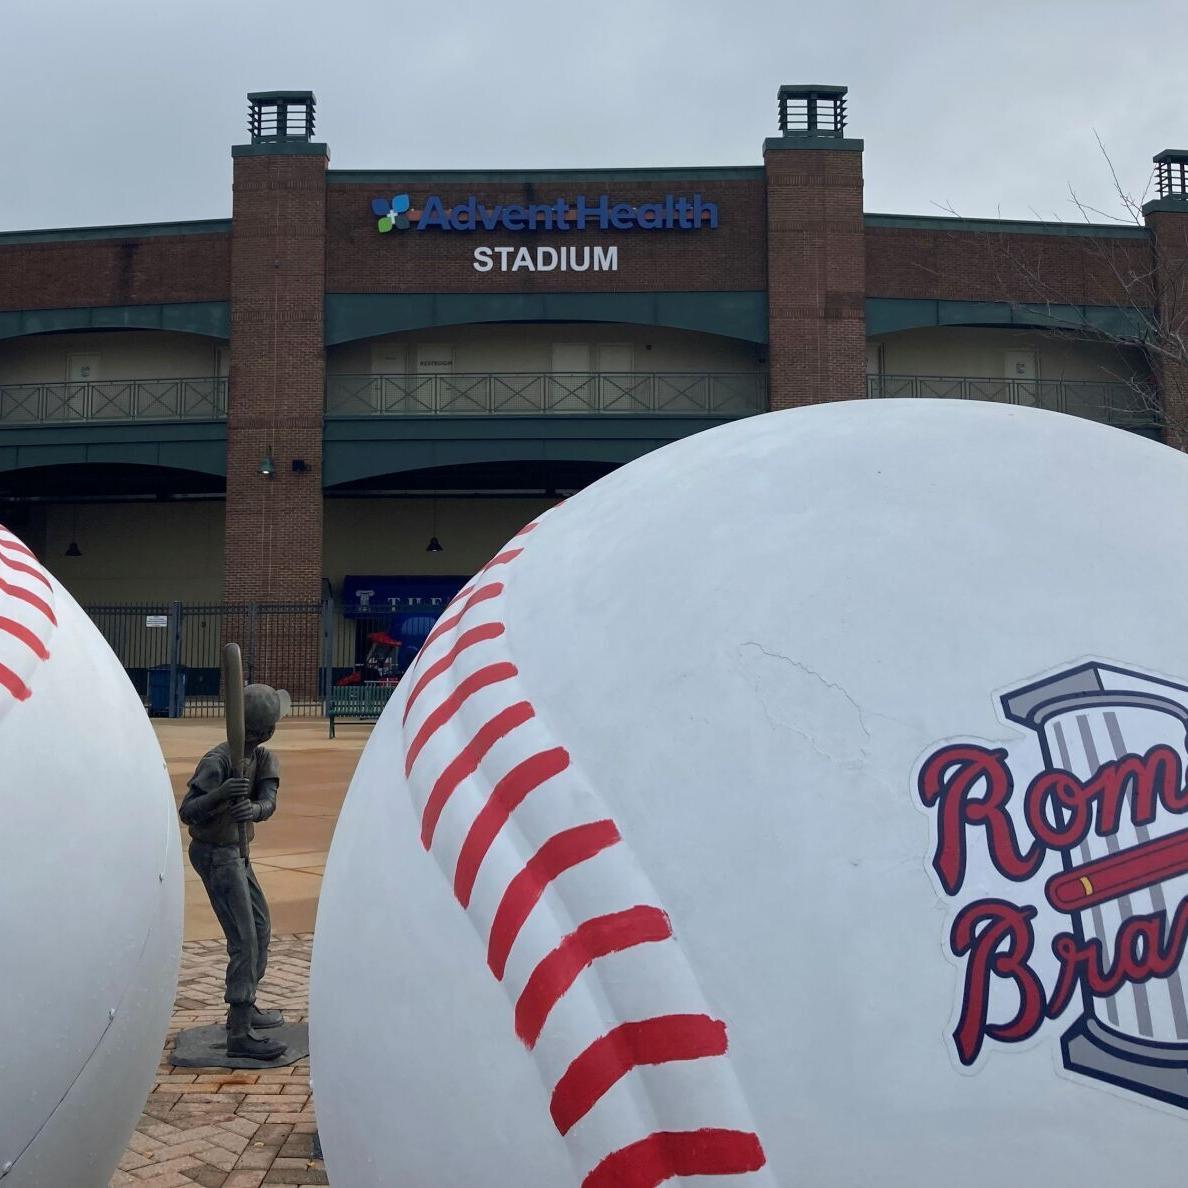 Name change in store for the Rome Braves as team seeks community